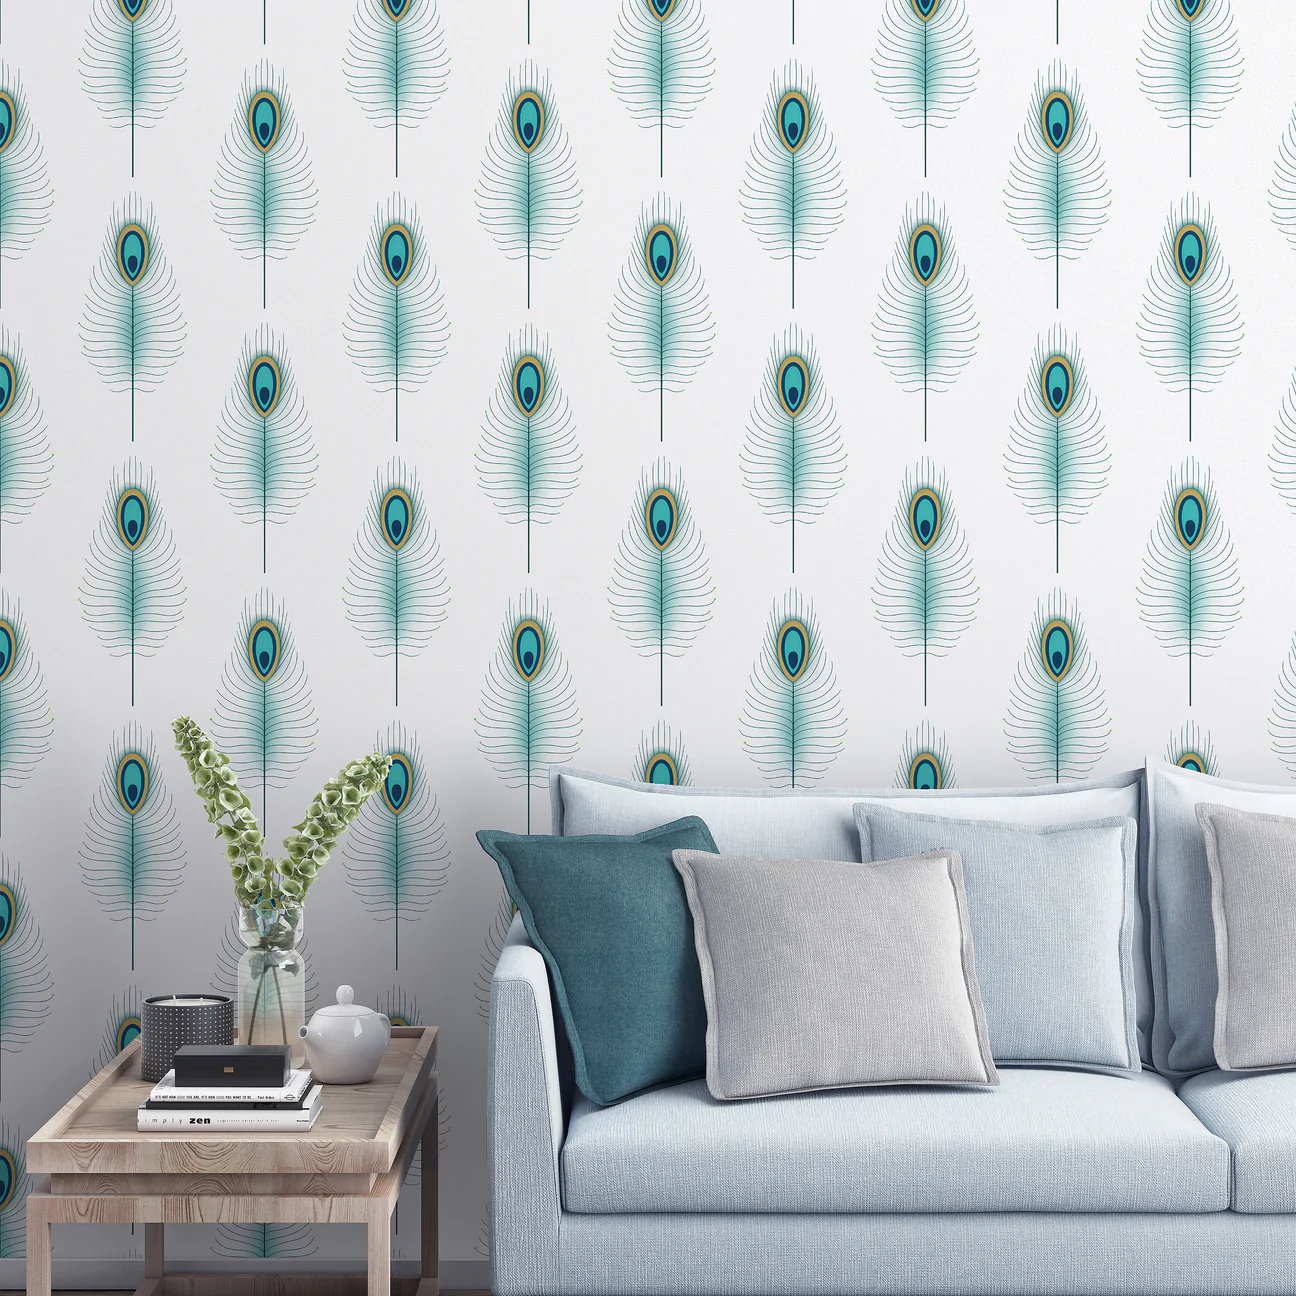 Eco-friendly wallpaper made in Montreal - Apesenteur